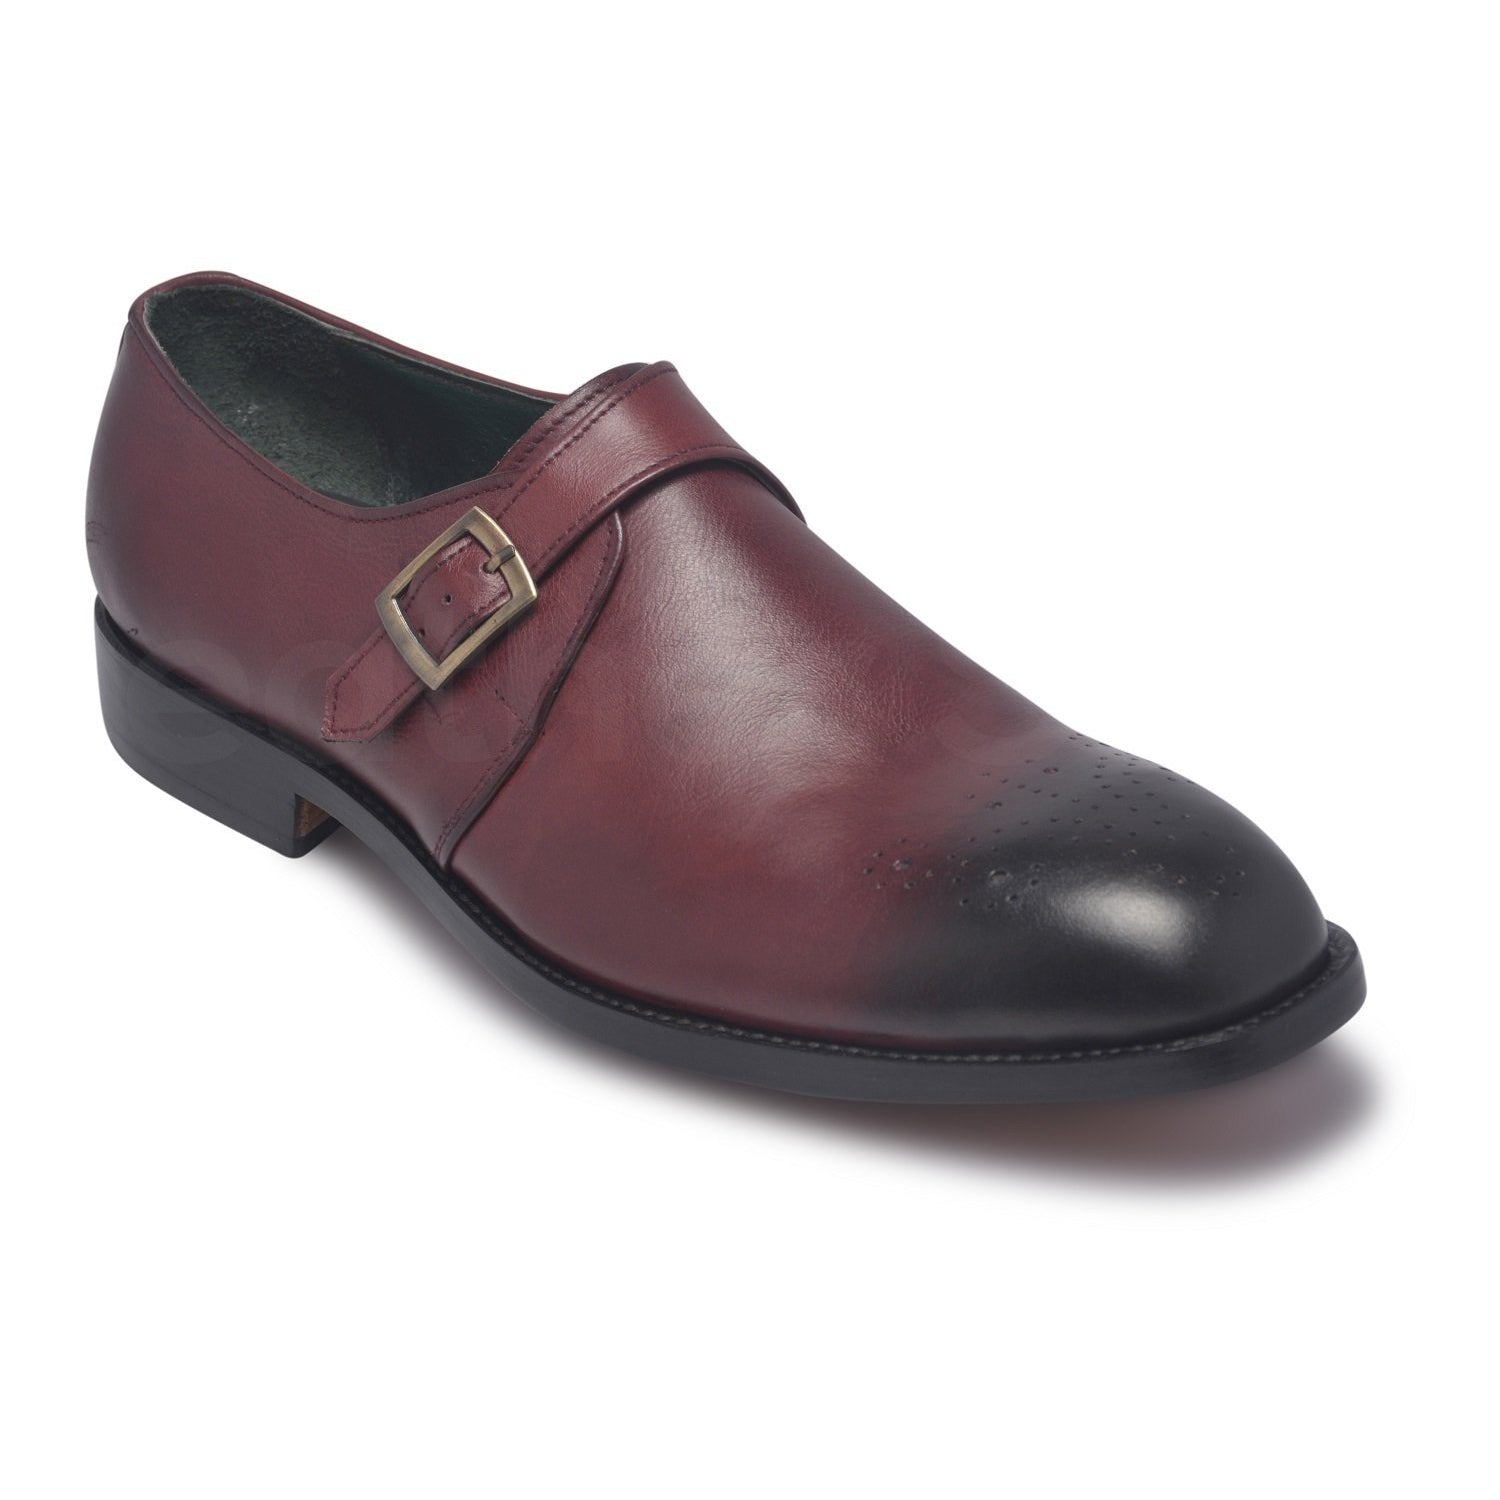 Two Tone mens leather shoes monk strap